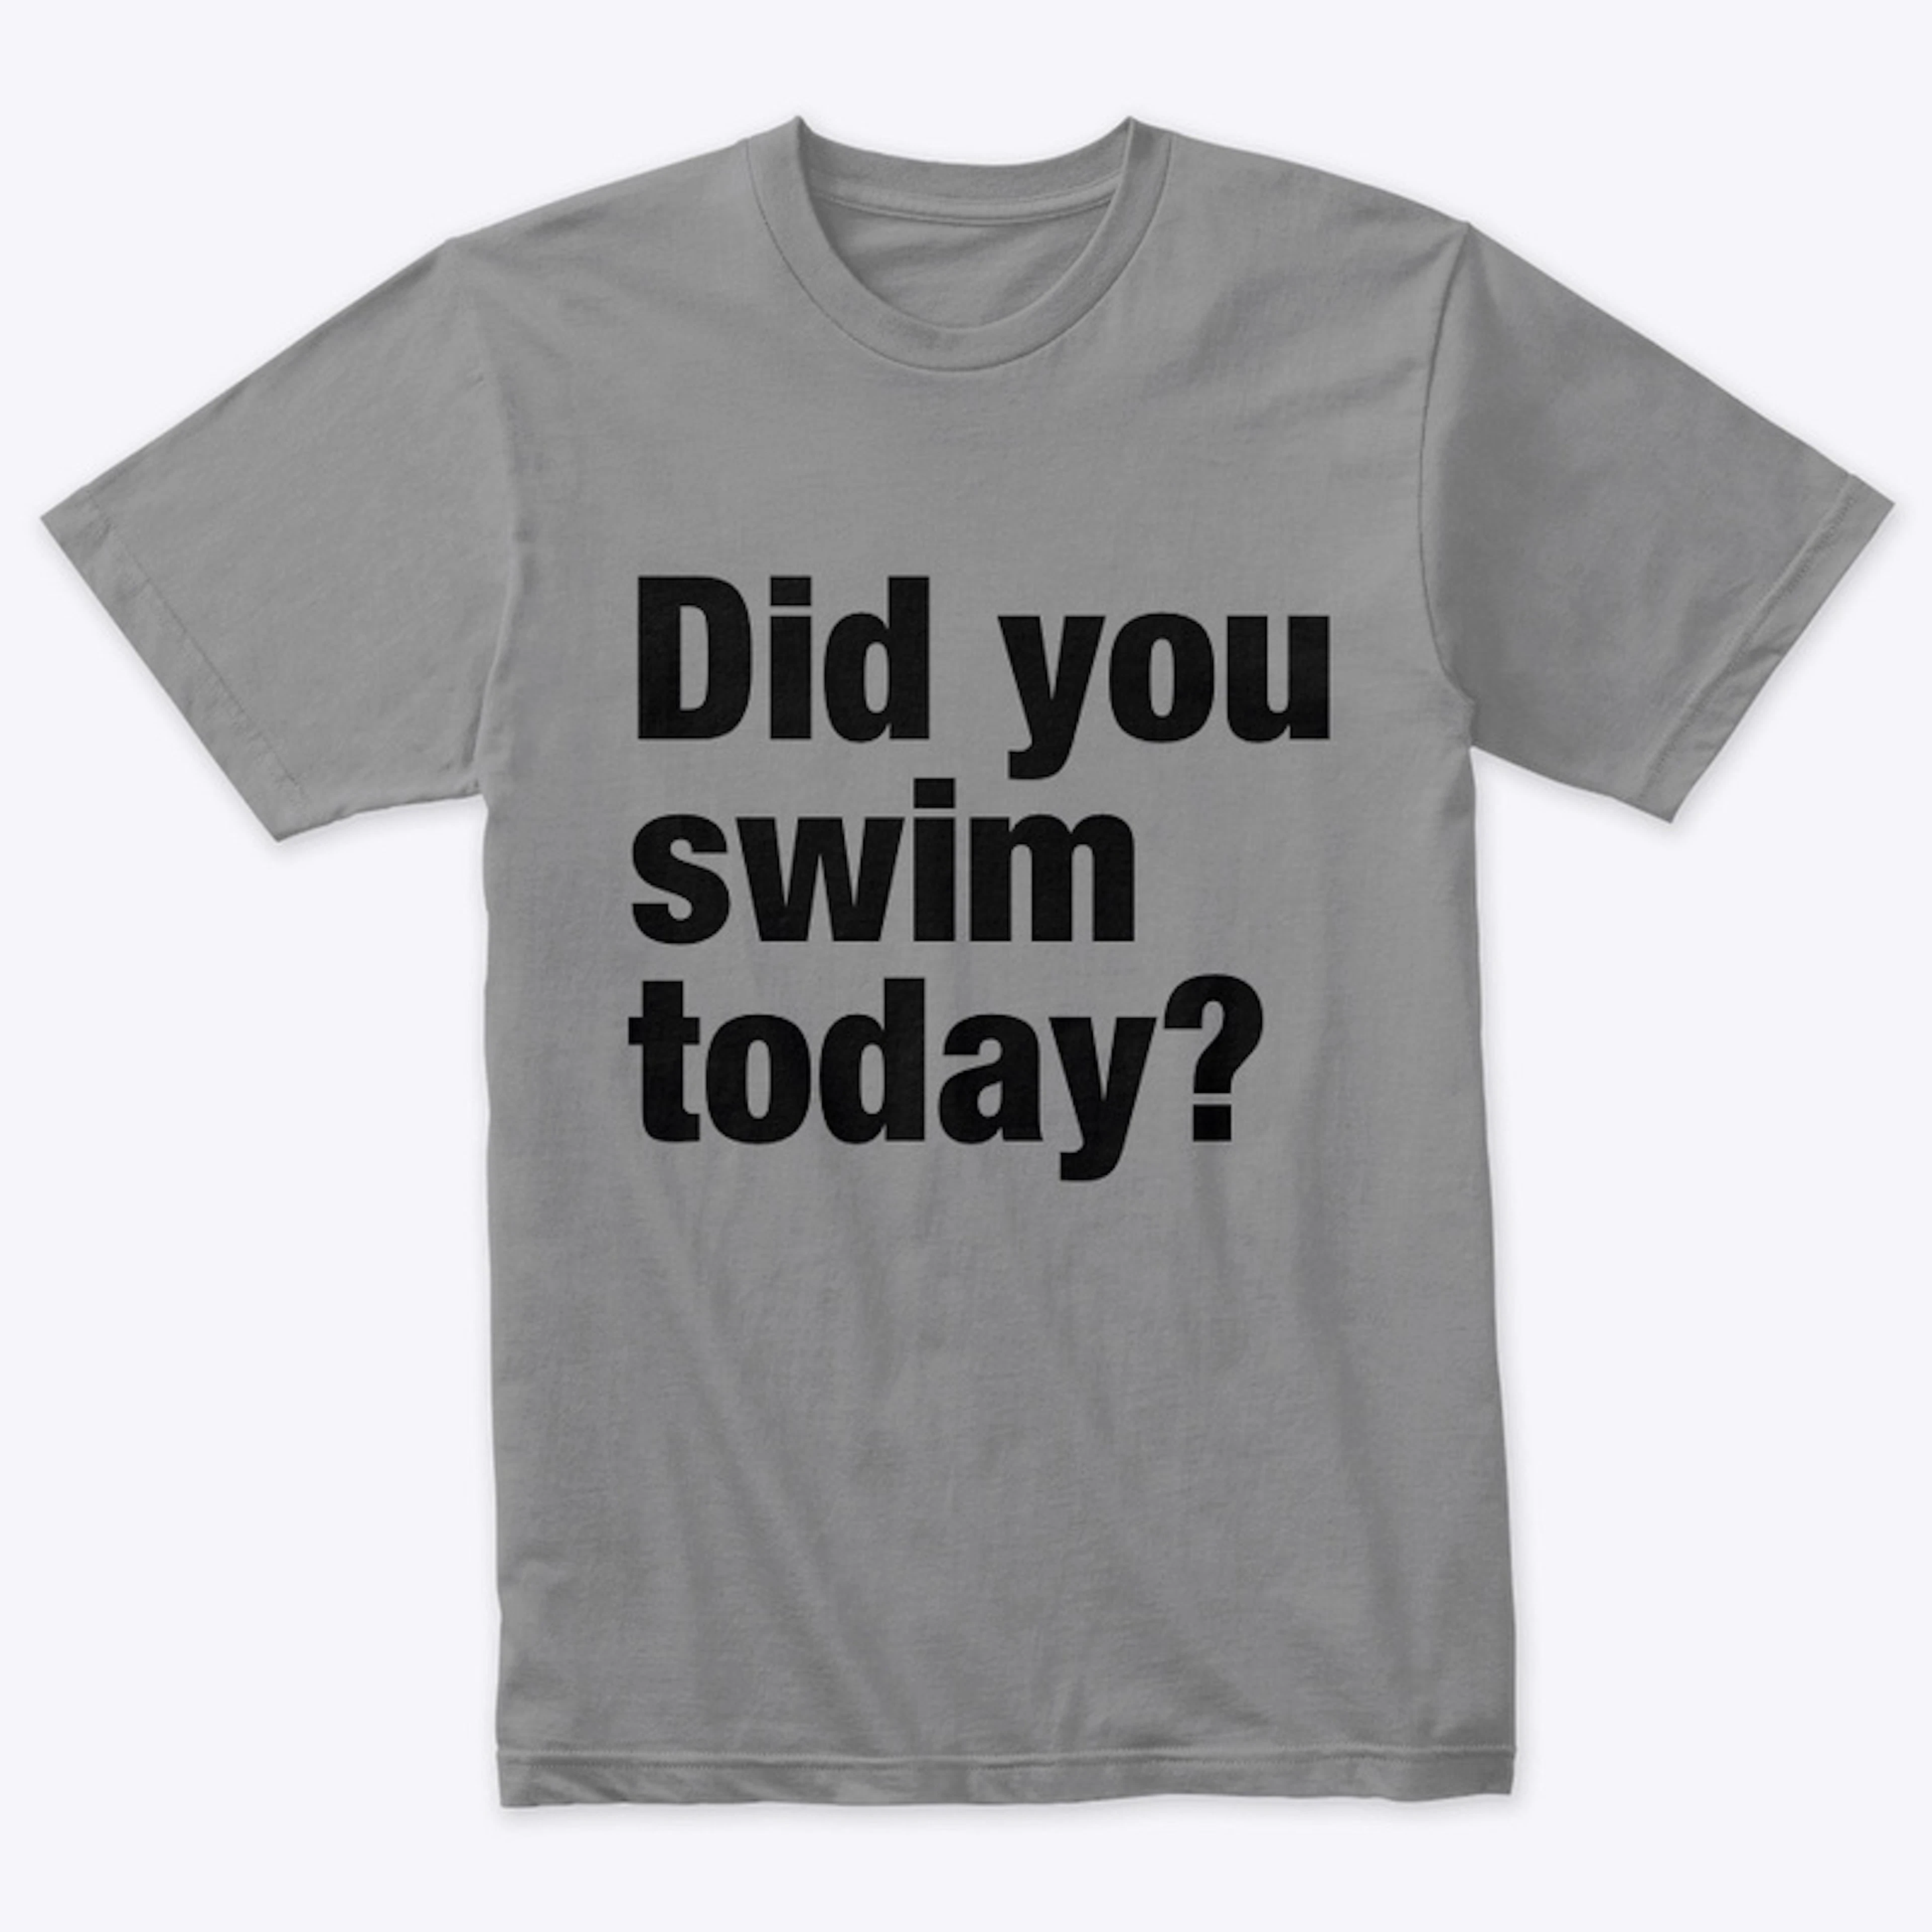 Did you swim today